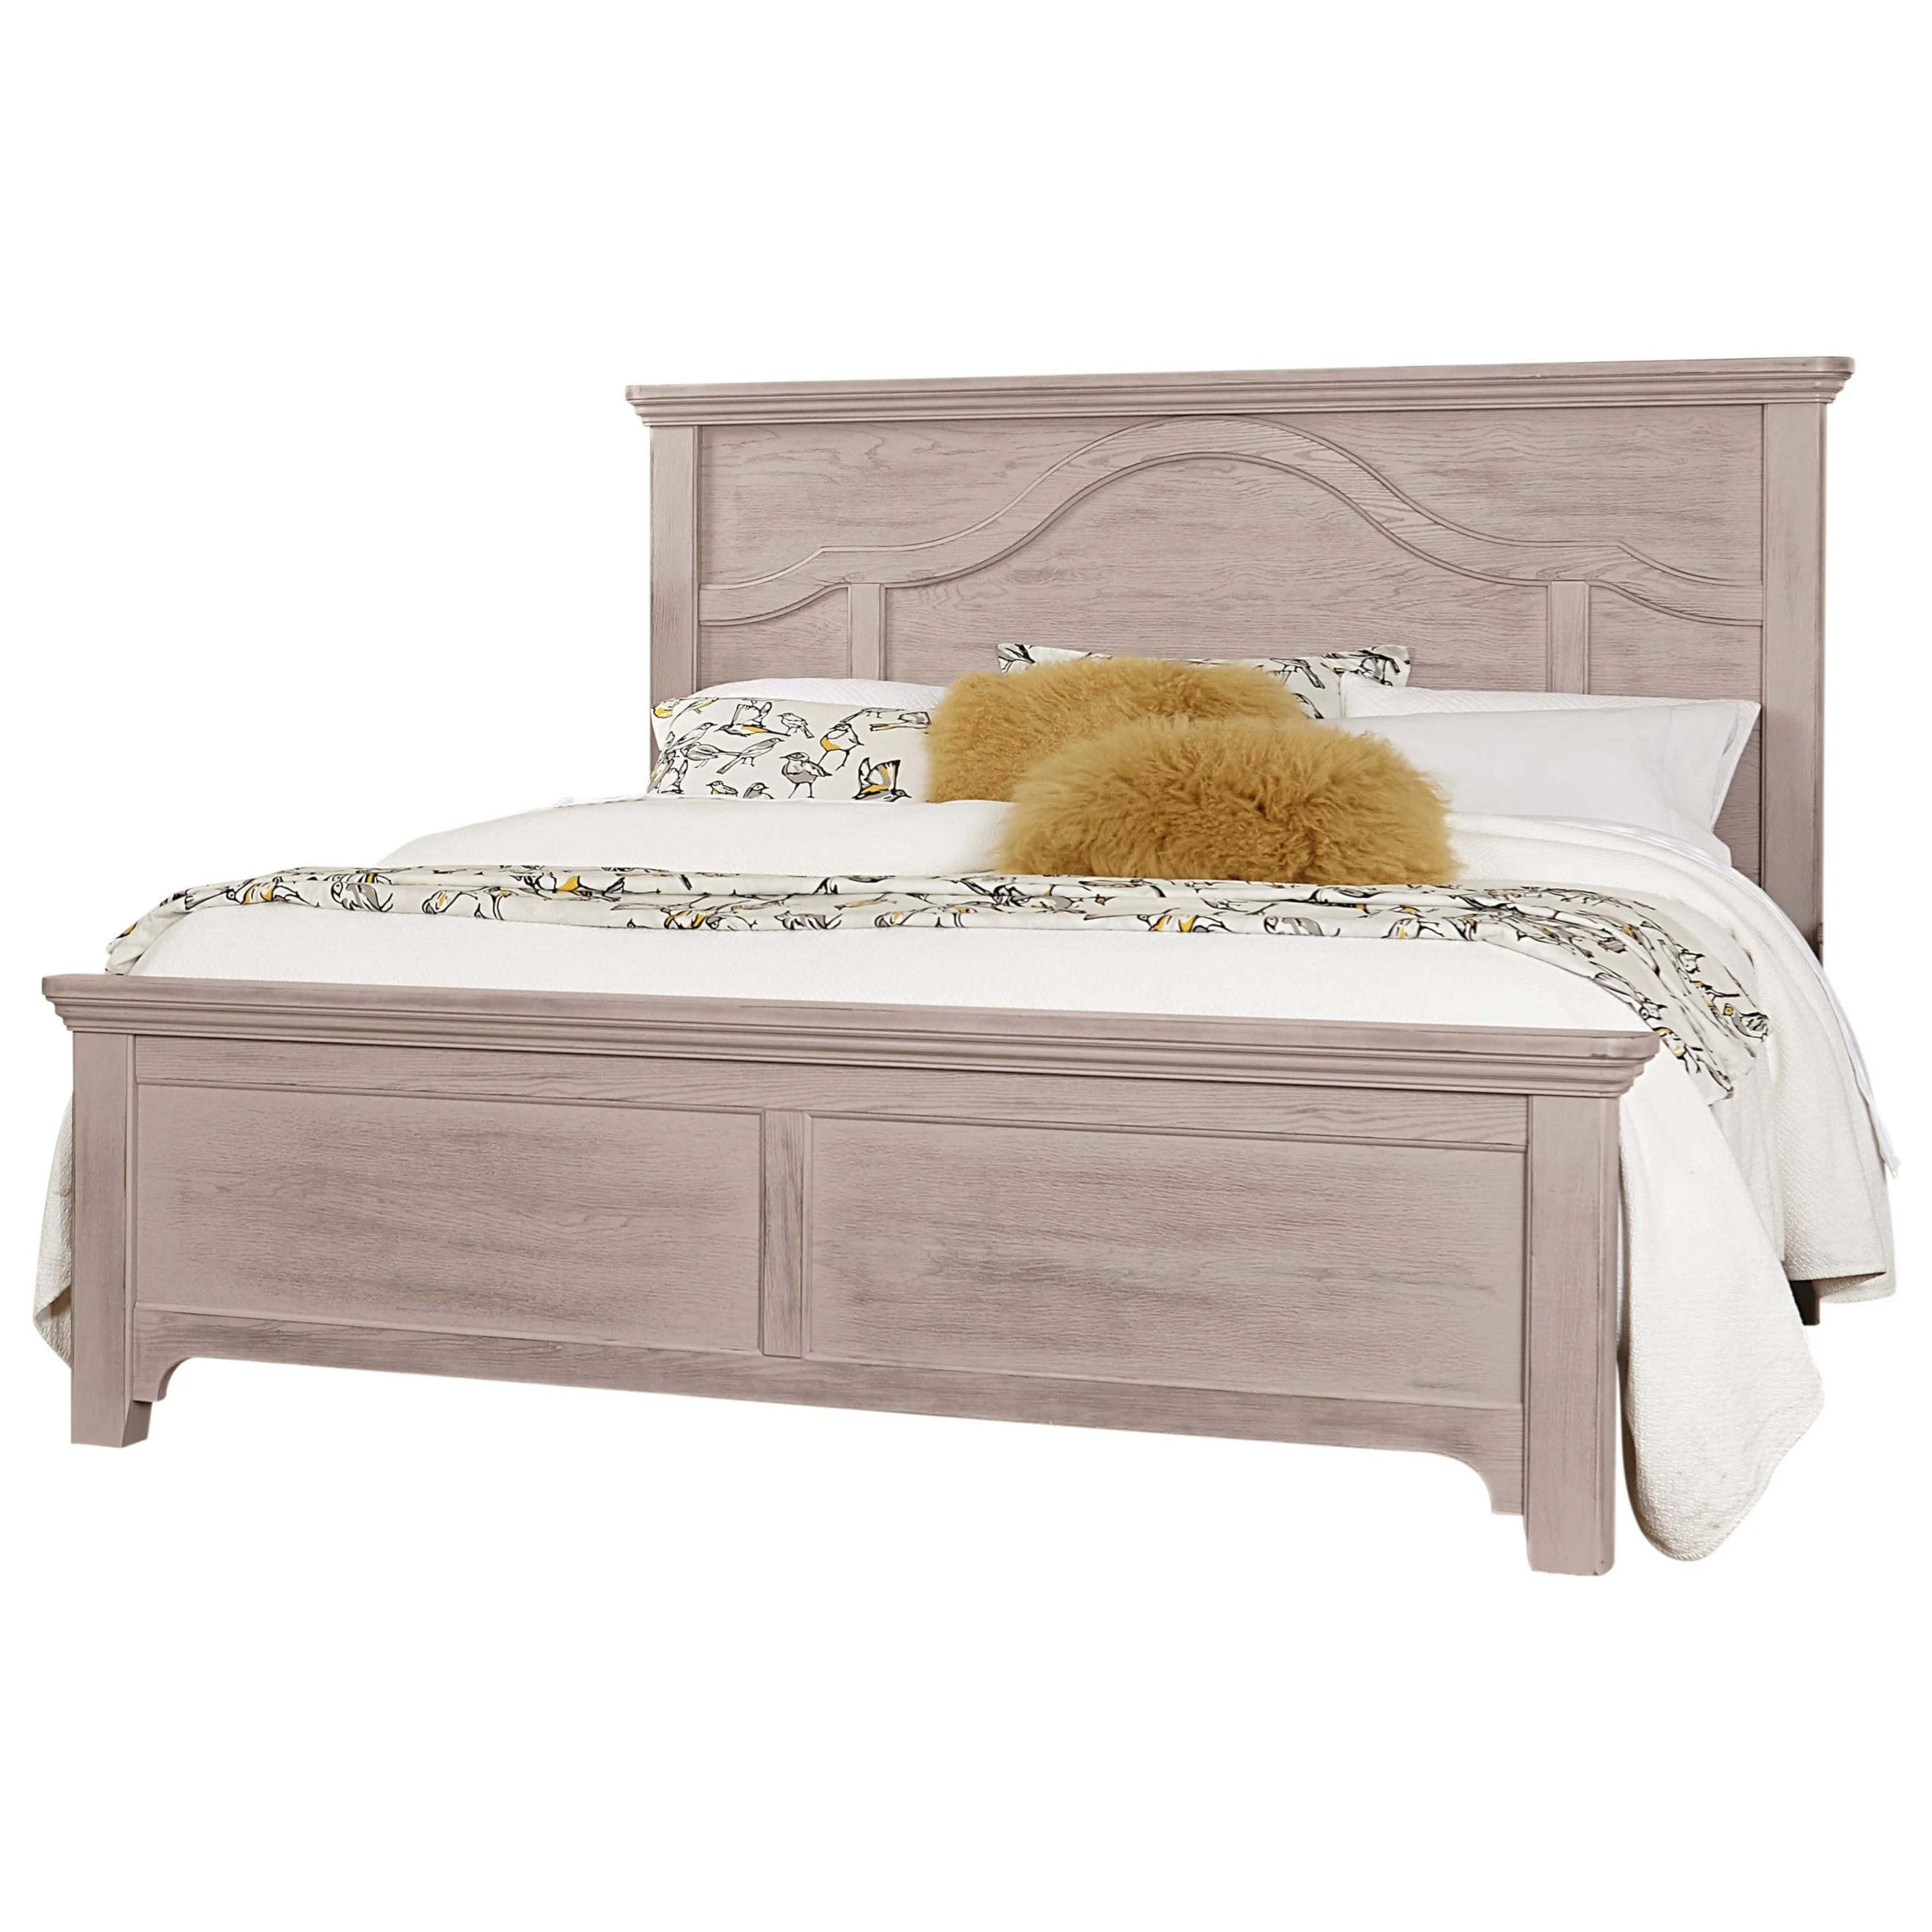 Laurel Mercantile Co Bungalow 471 559 955 922 Transitional Queen Bed With Mantel Headboard